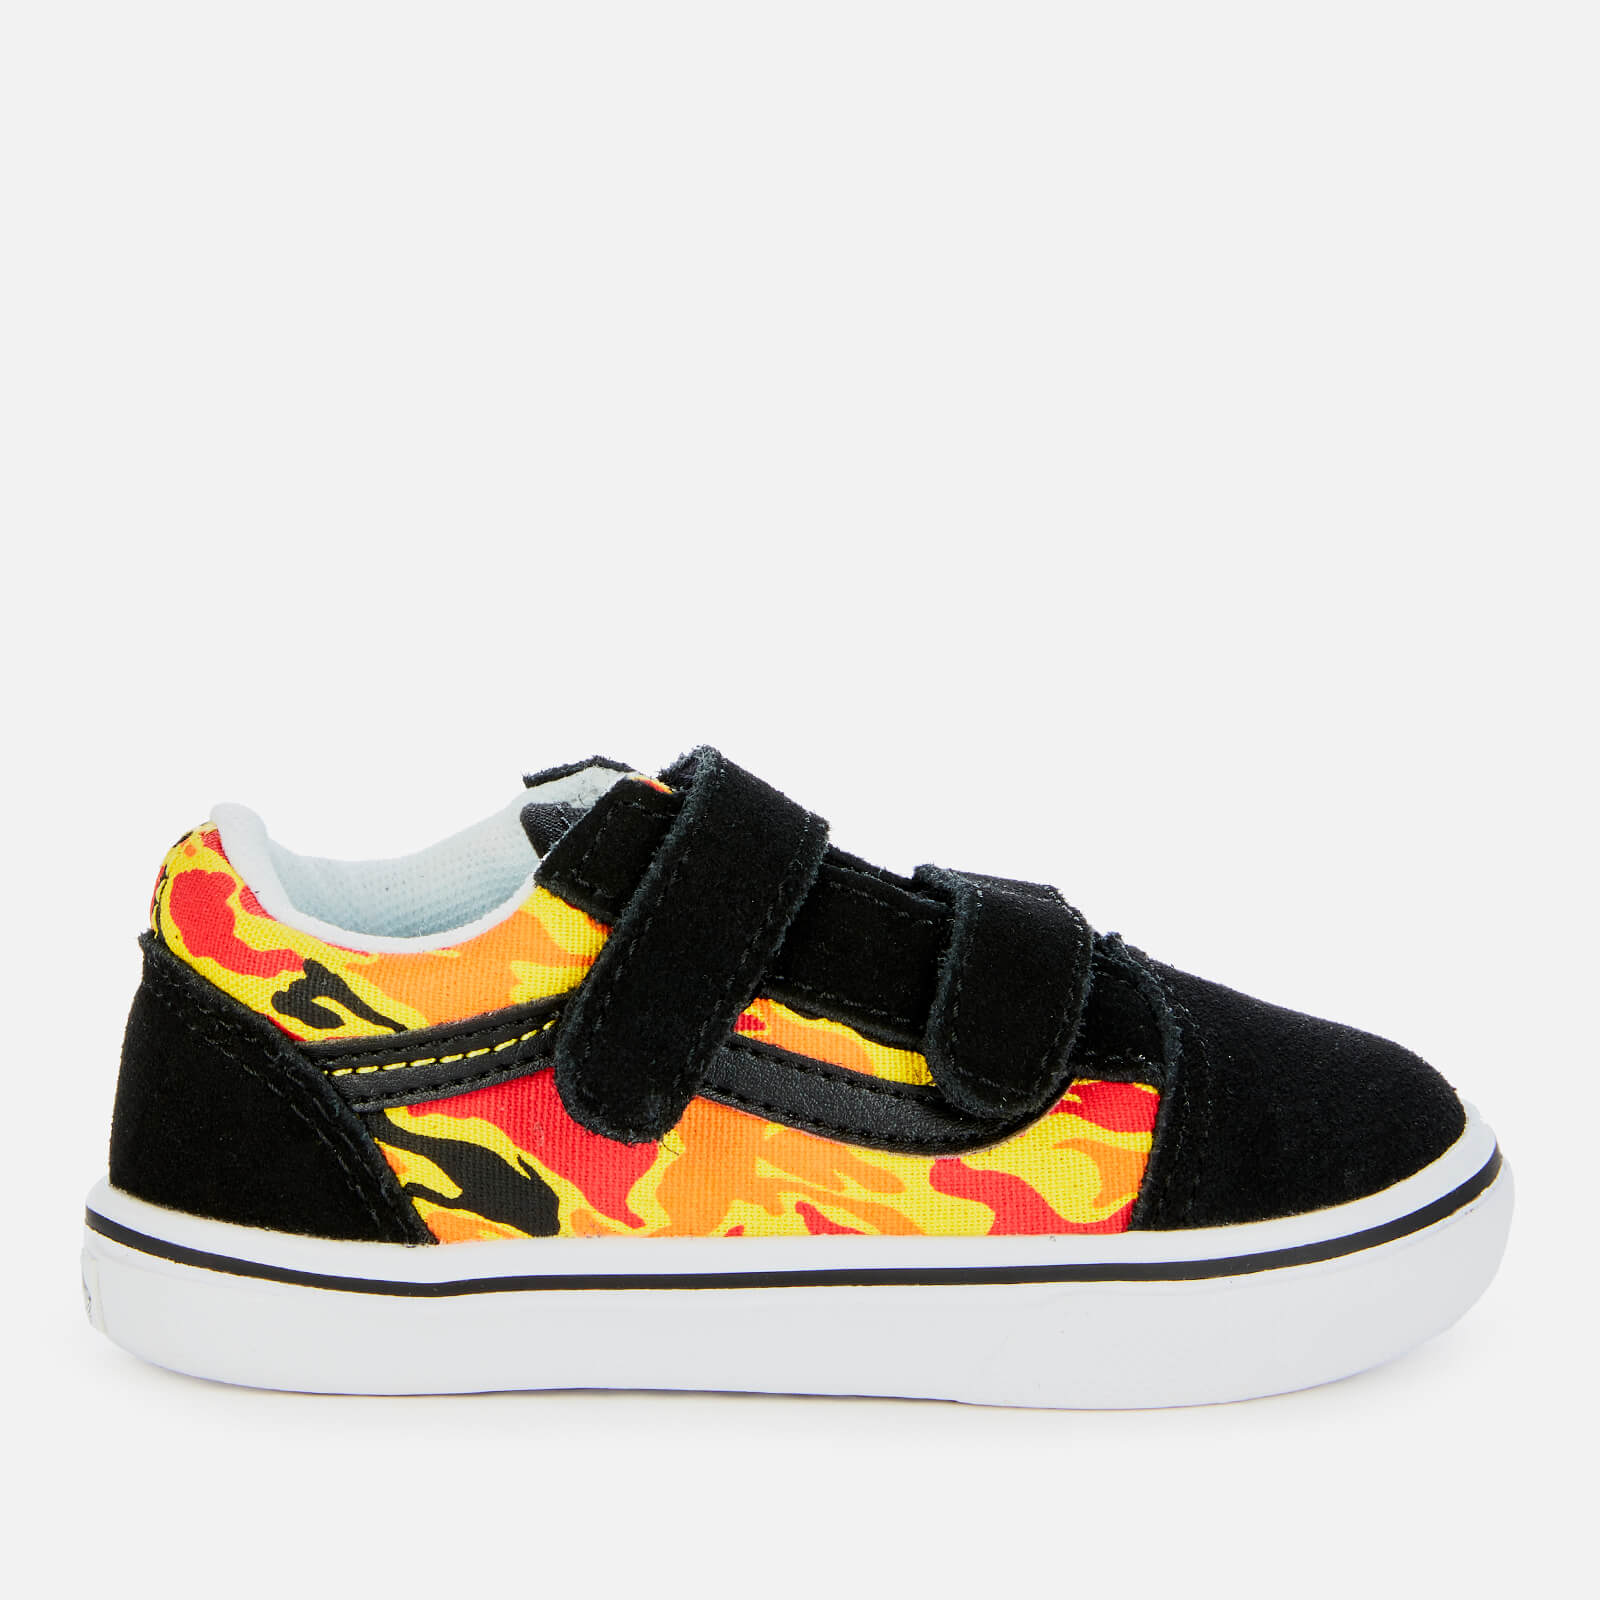 Vans Toddlers' Comfycush Old Skool Velcro Trainers - Flame Camo - UK 2 Baby